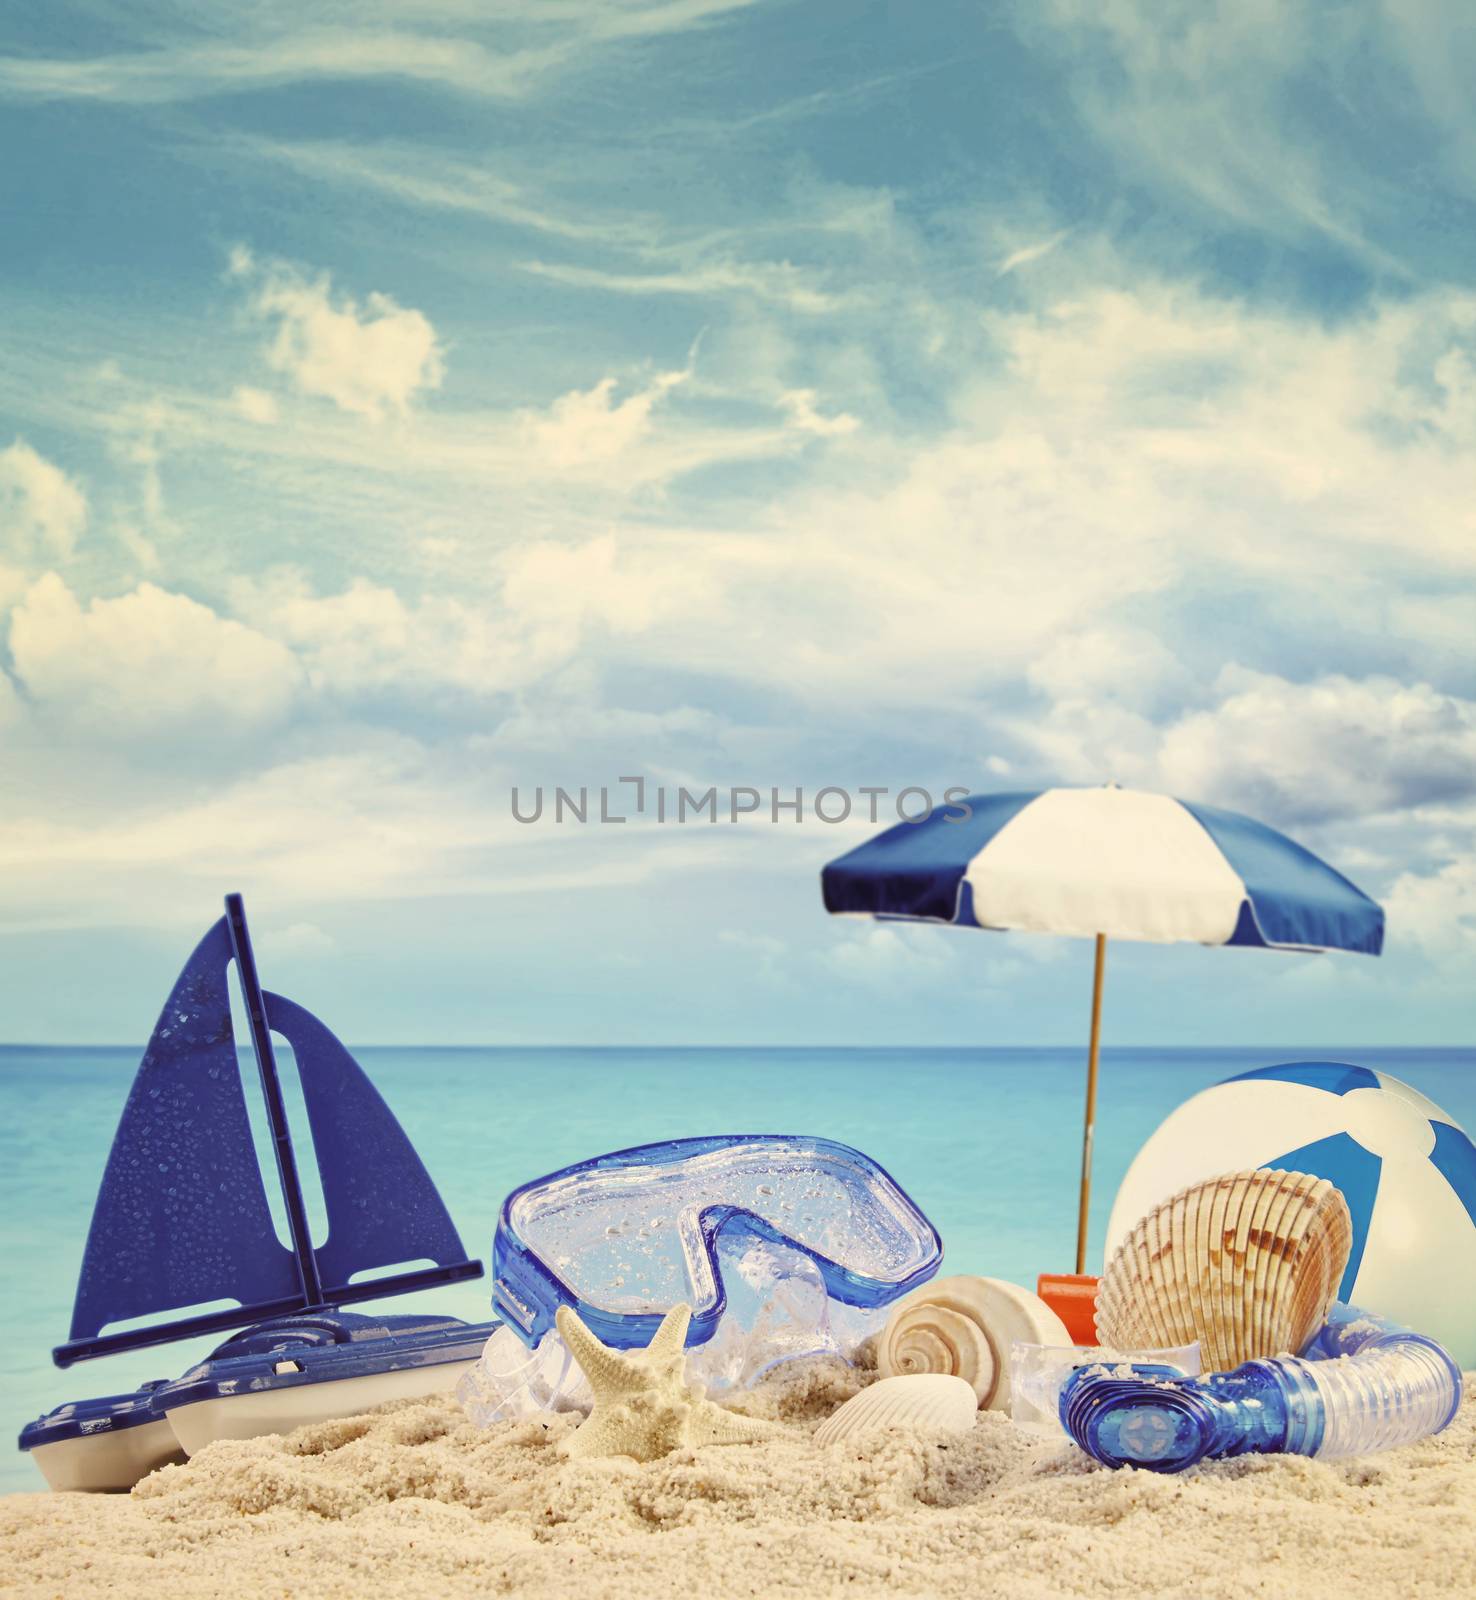 Beach toys on sandy beach with blue sea in background by Sandralise